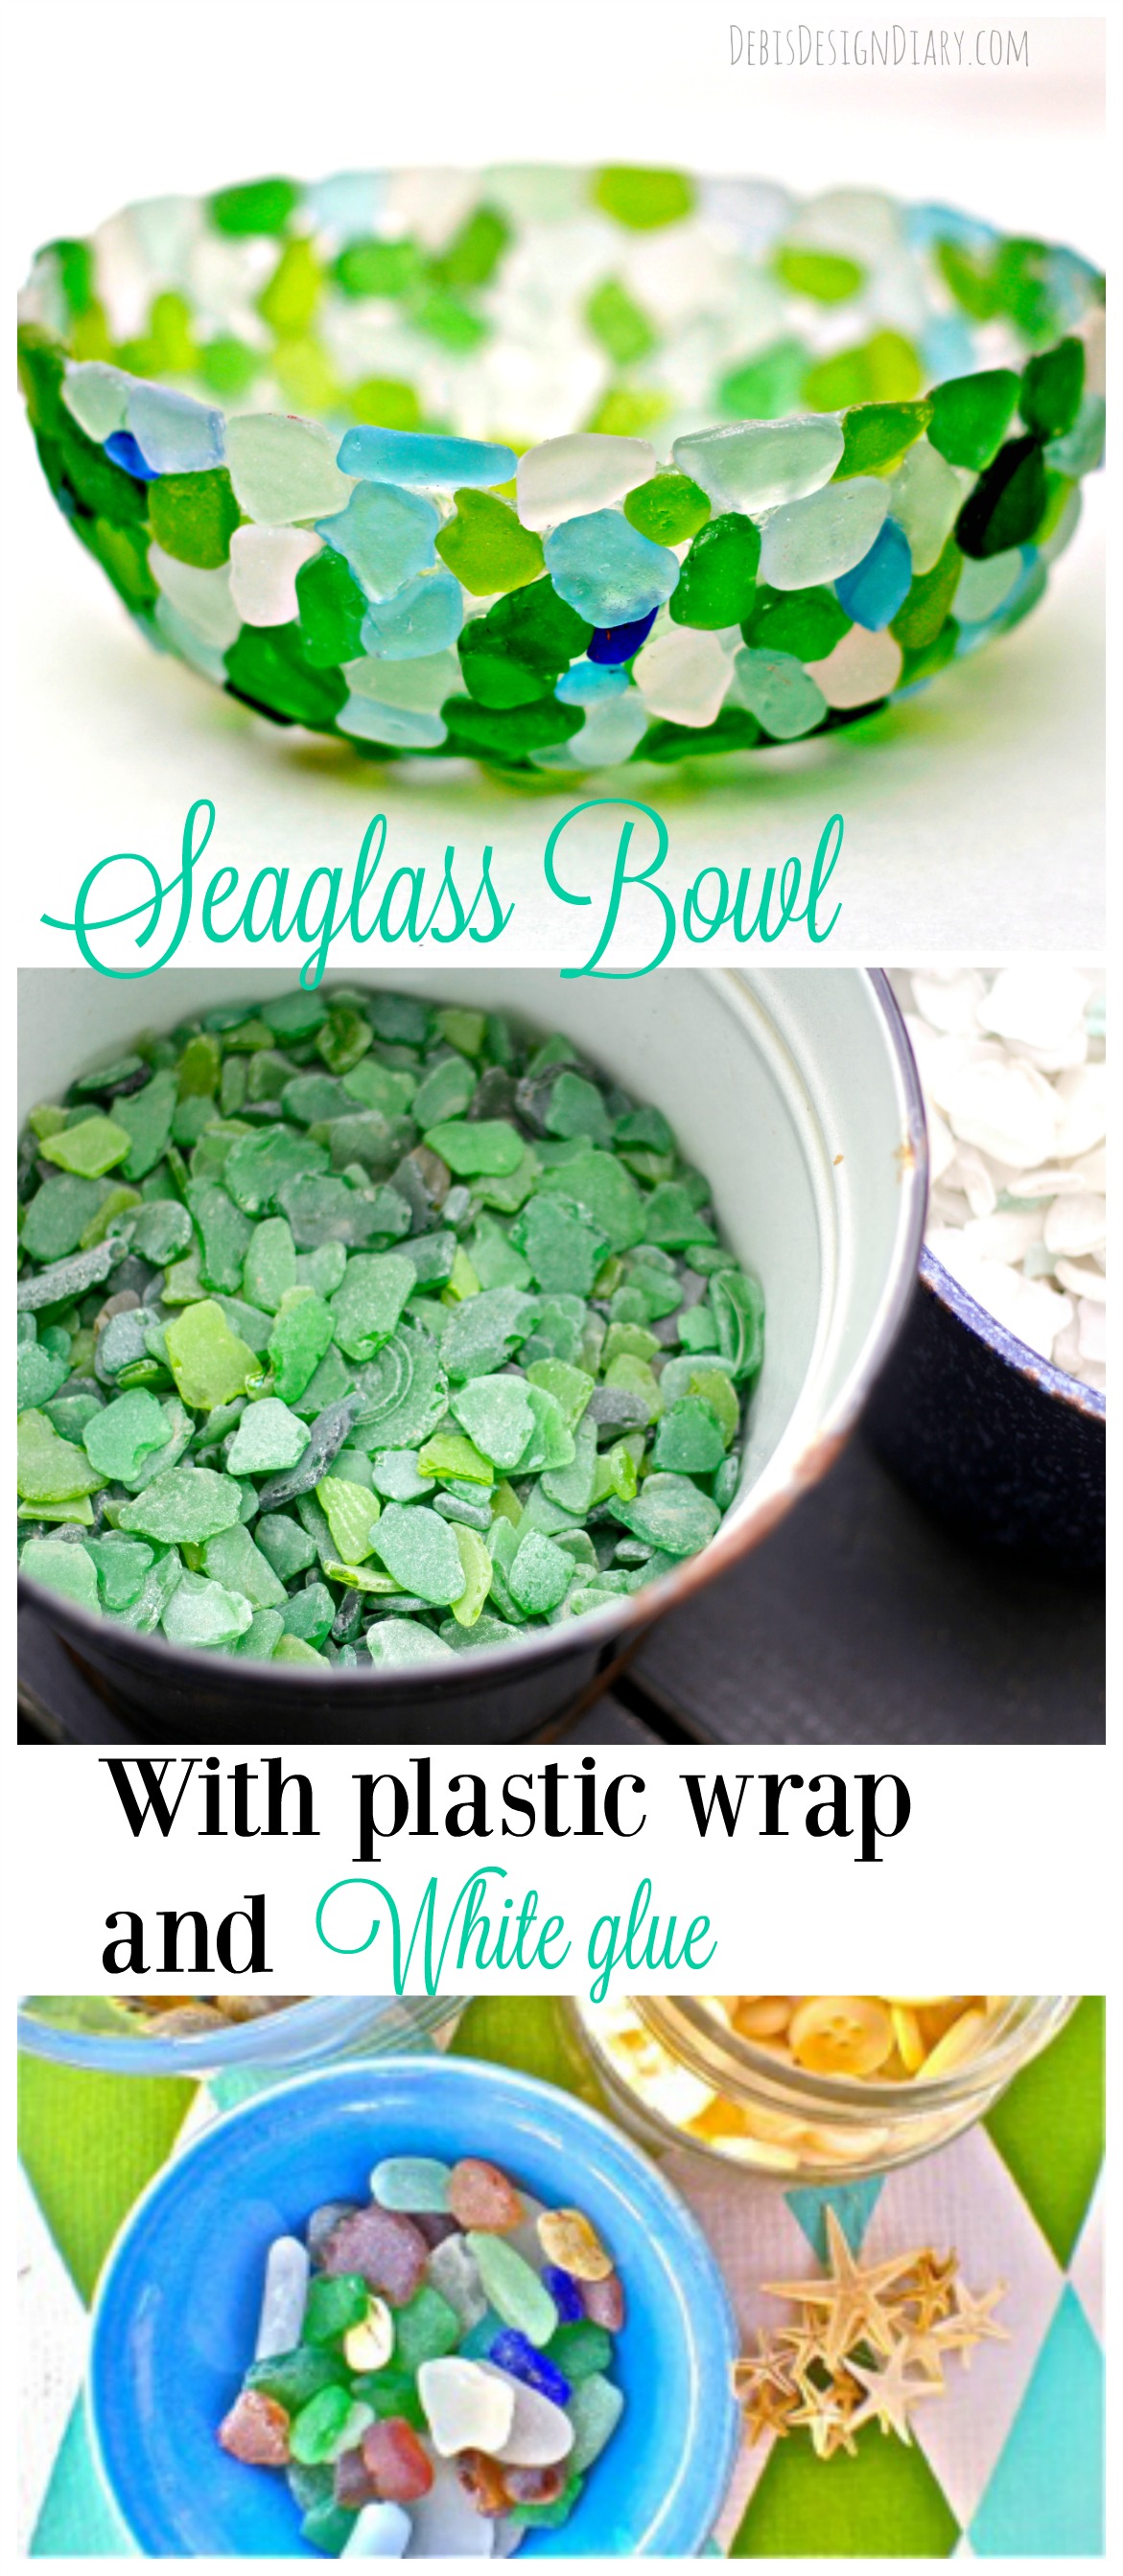 how to make a sea glass bowl with plastic wrap and white glue